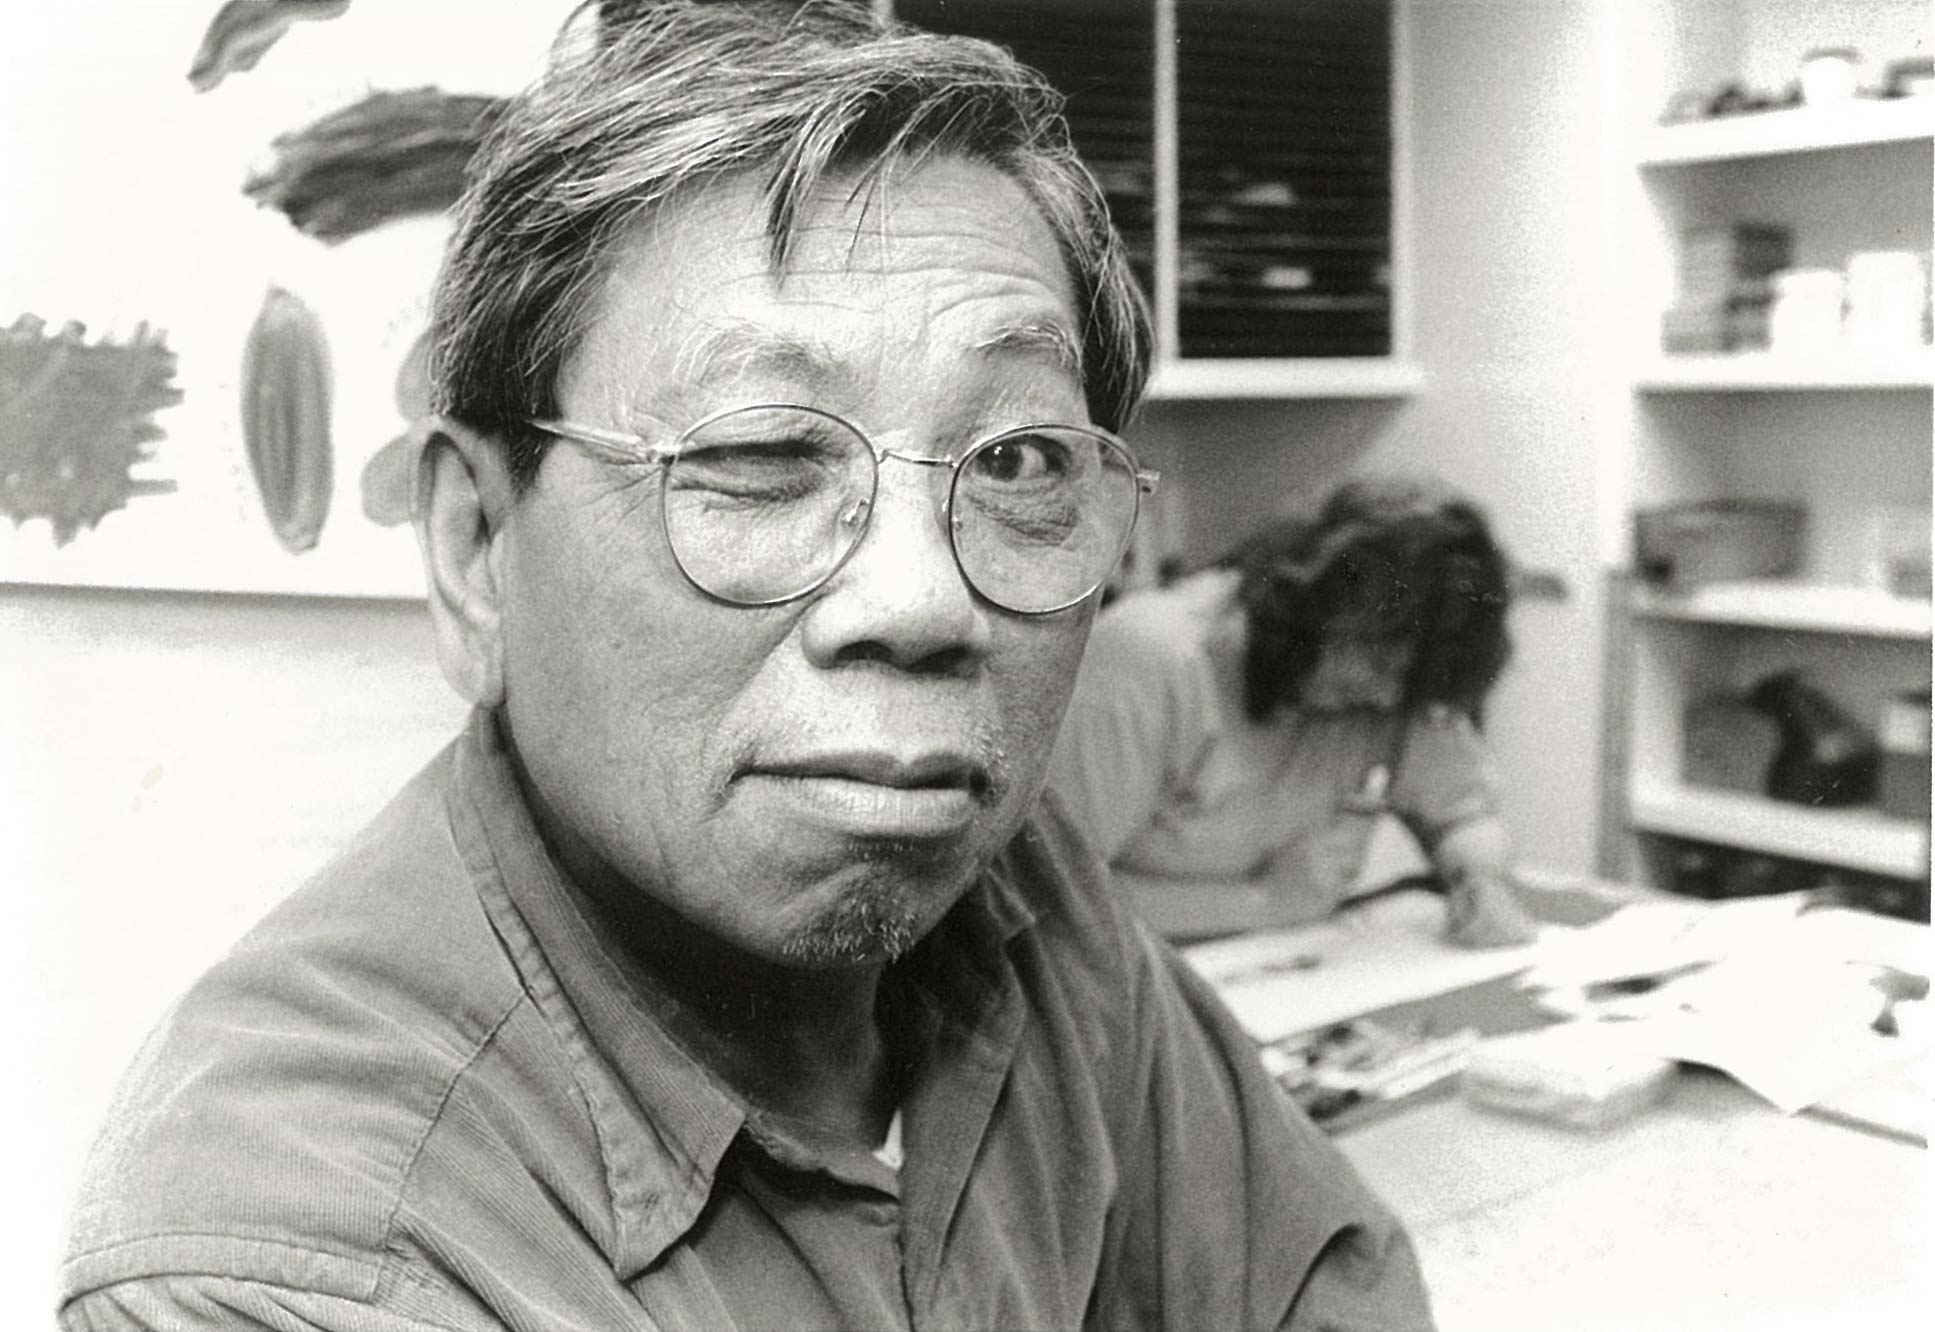 The Chen Lok Lee Legacy Project - The Sachs Program for Arts Innovation